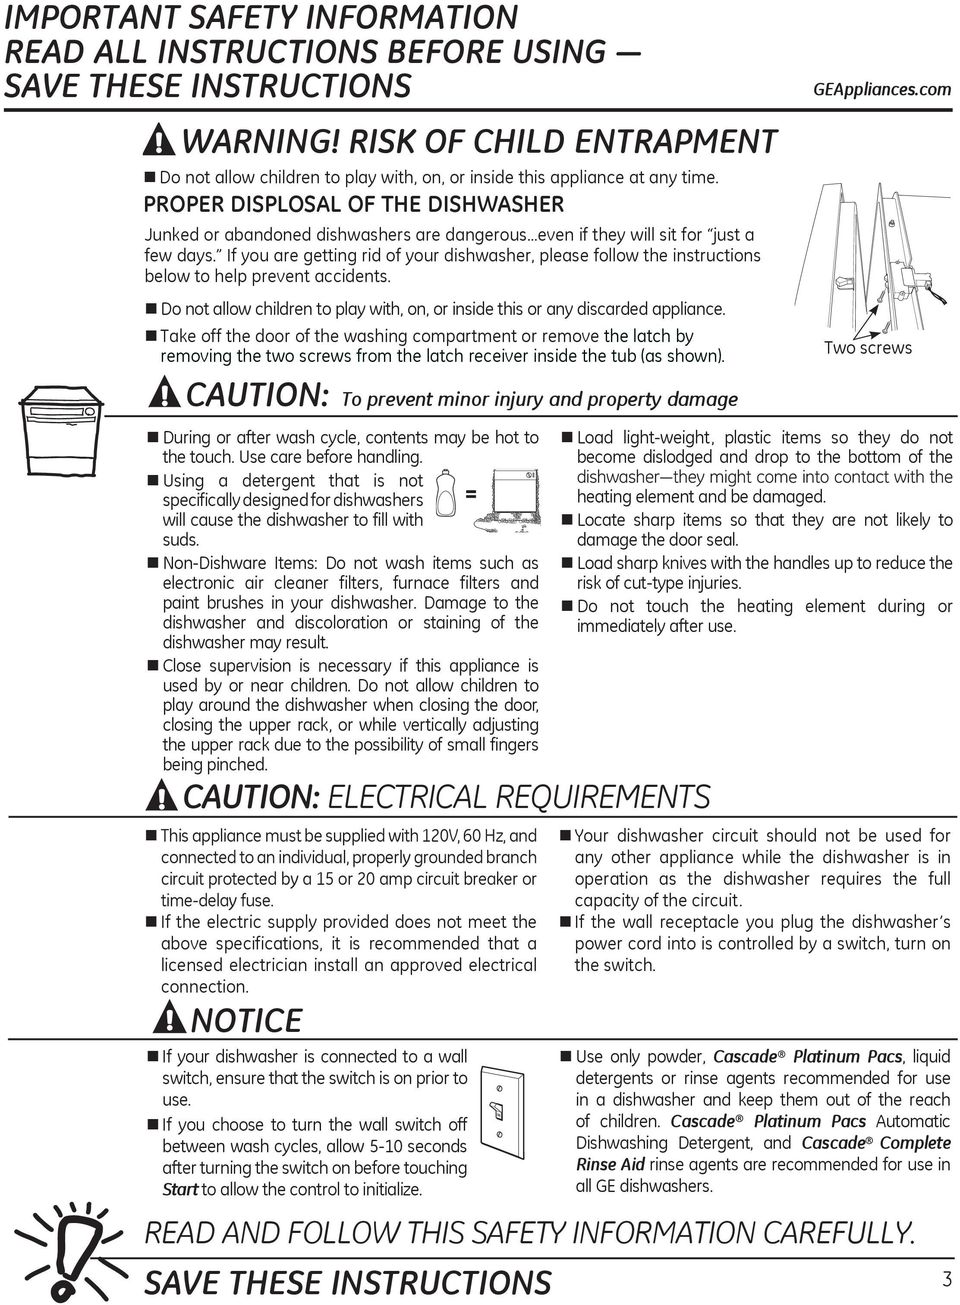 If you are getting rid of your dishwasher, please follow the instructions below to help prevent accidents. Do not allow children to play with, on, or inside this or any discarded appliance.